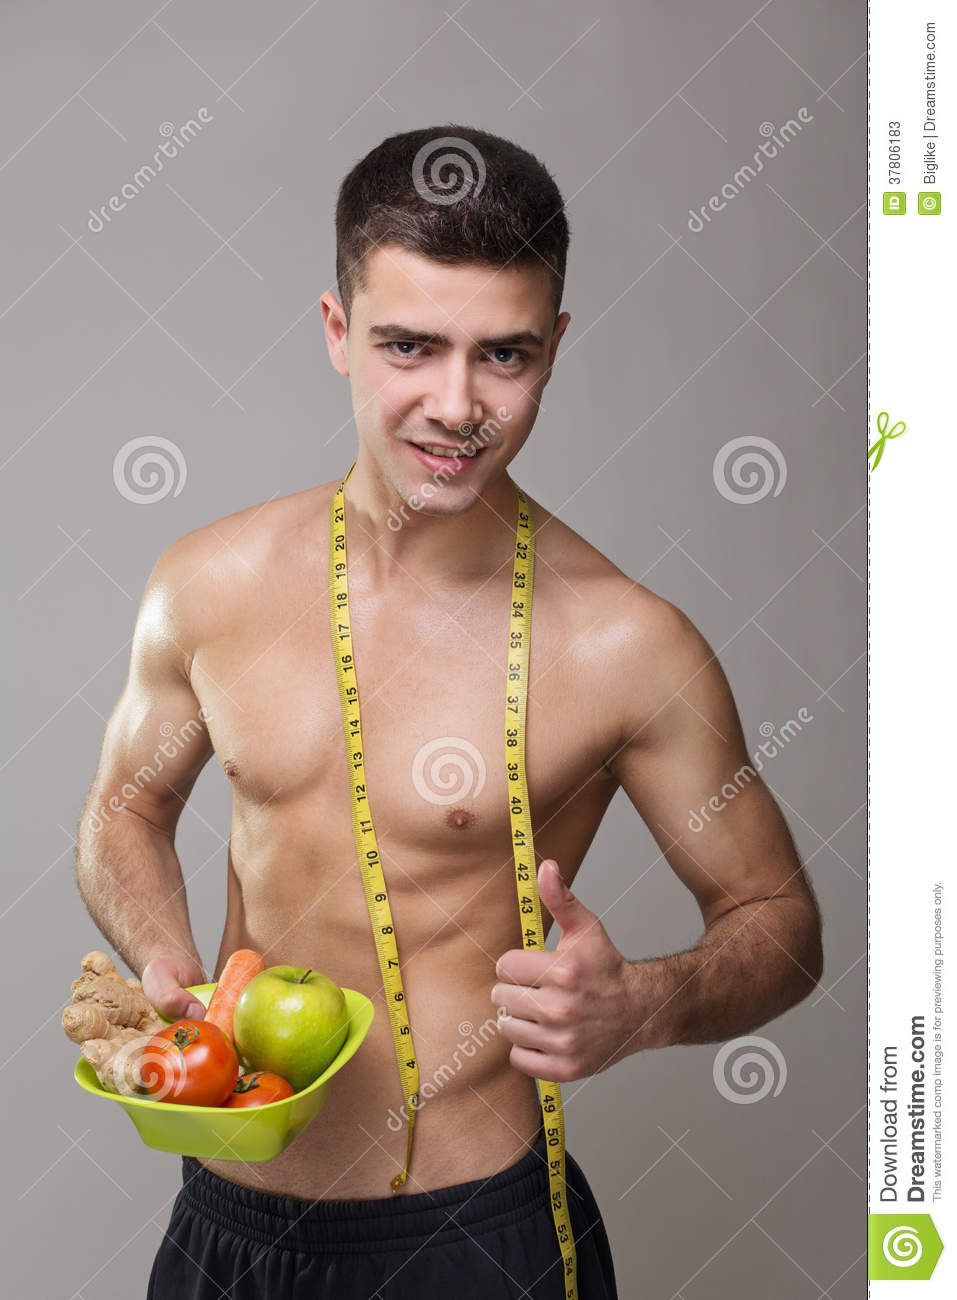 Healthy Food Vegan Fitness
 Fit Vegan Man With Measuring Tape And Healthy Food Stock